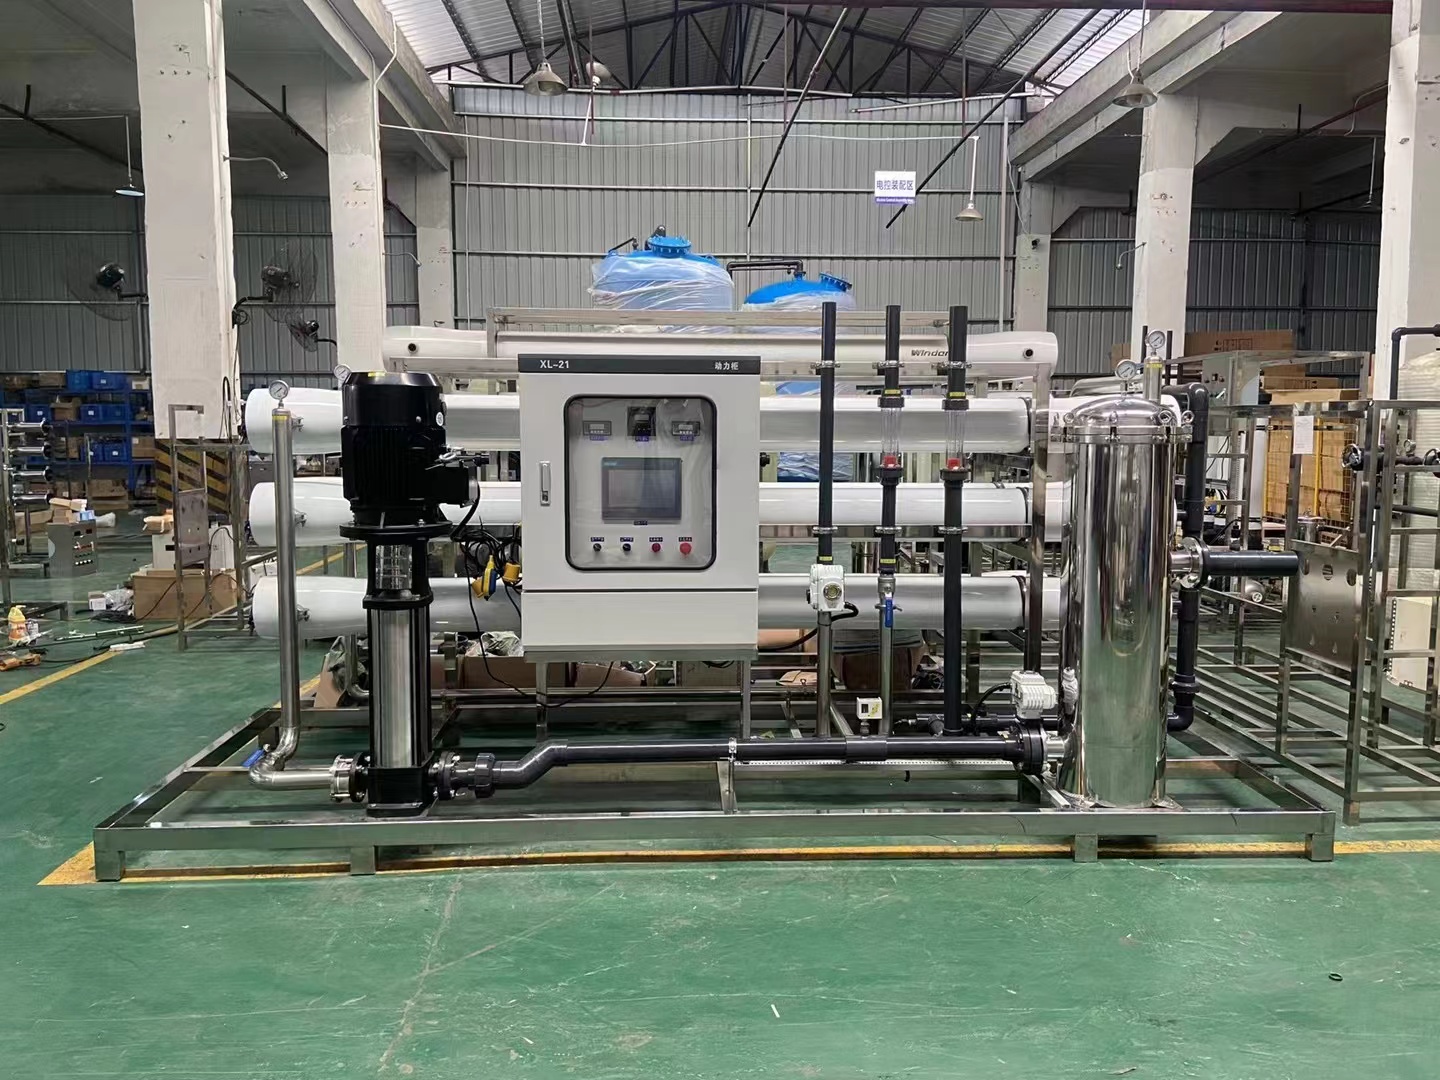 Reverse osmosis equipment, pure water equipment, commercial water purification equipment, RO desalination system, integrated purified water machine, customized for 100 tons